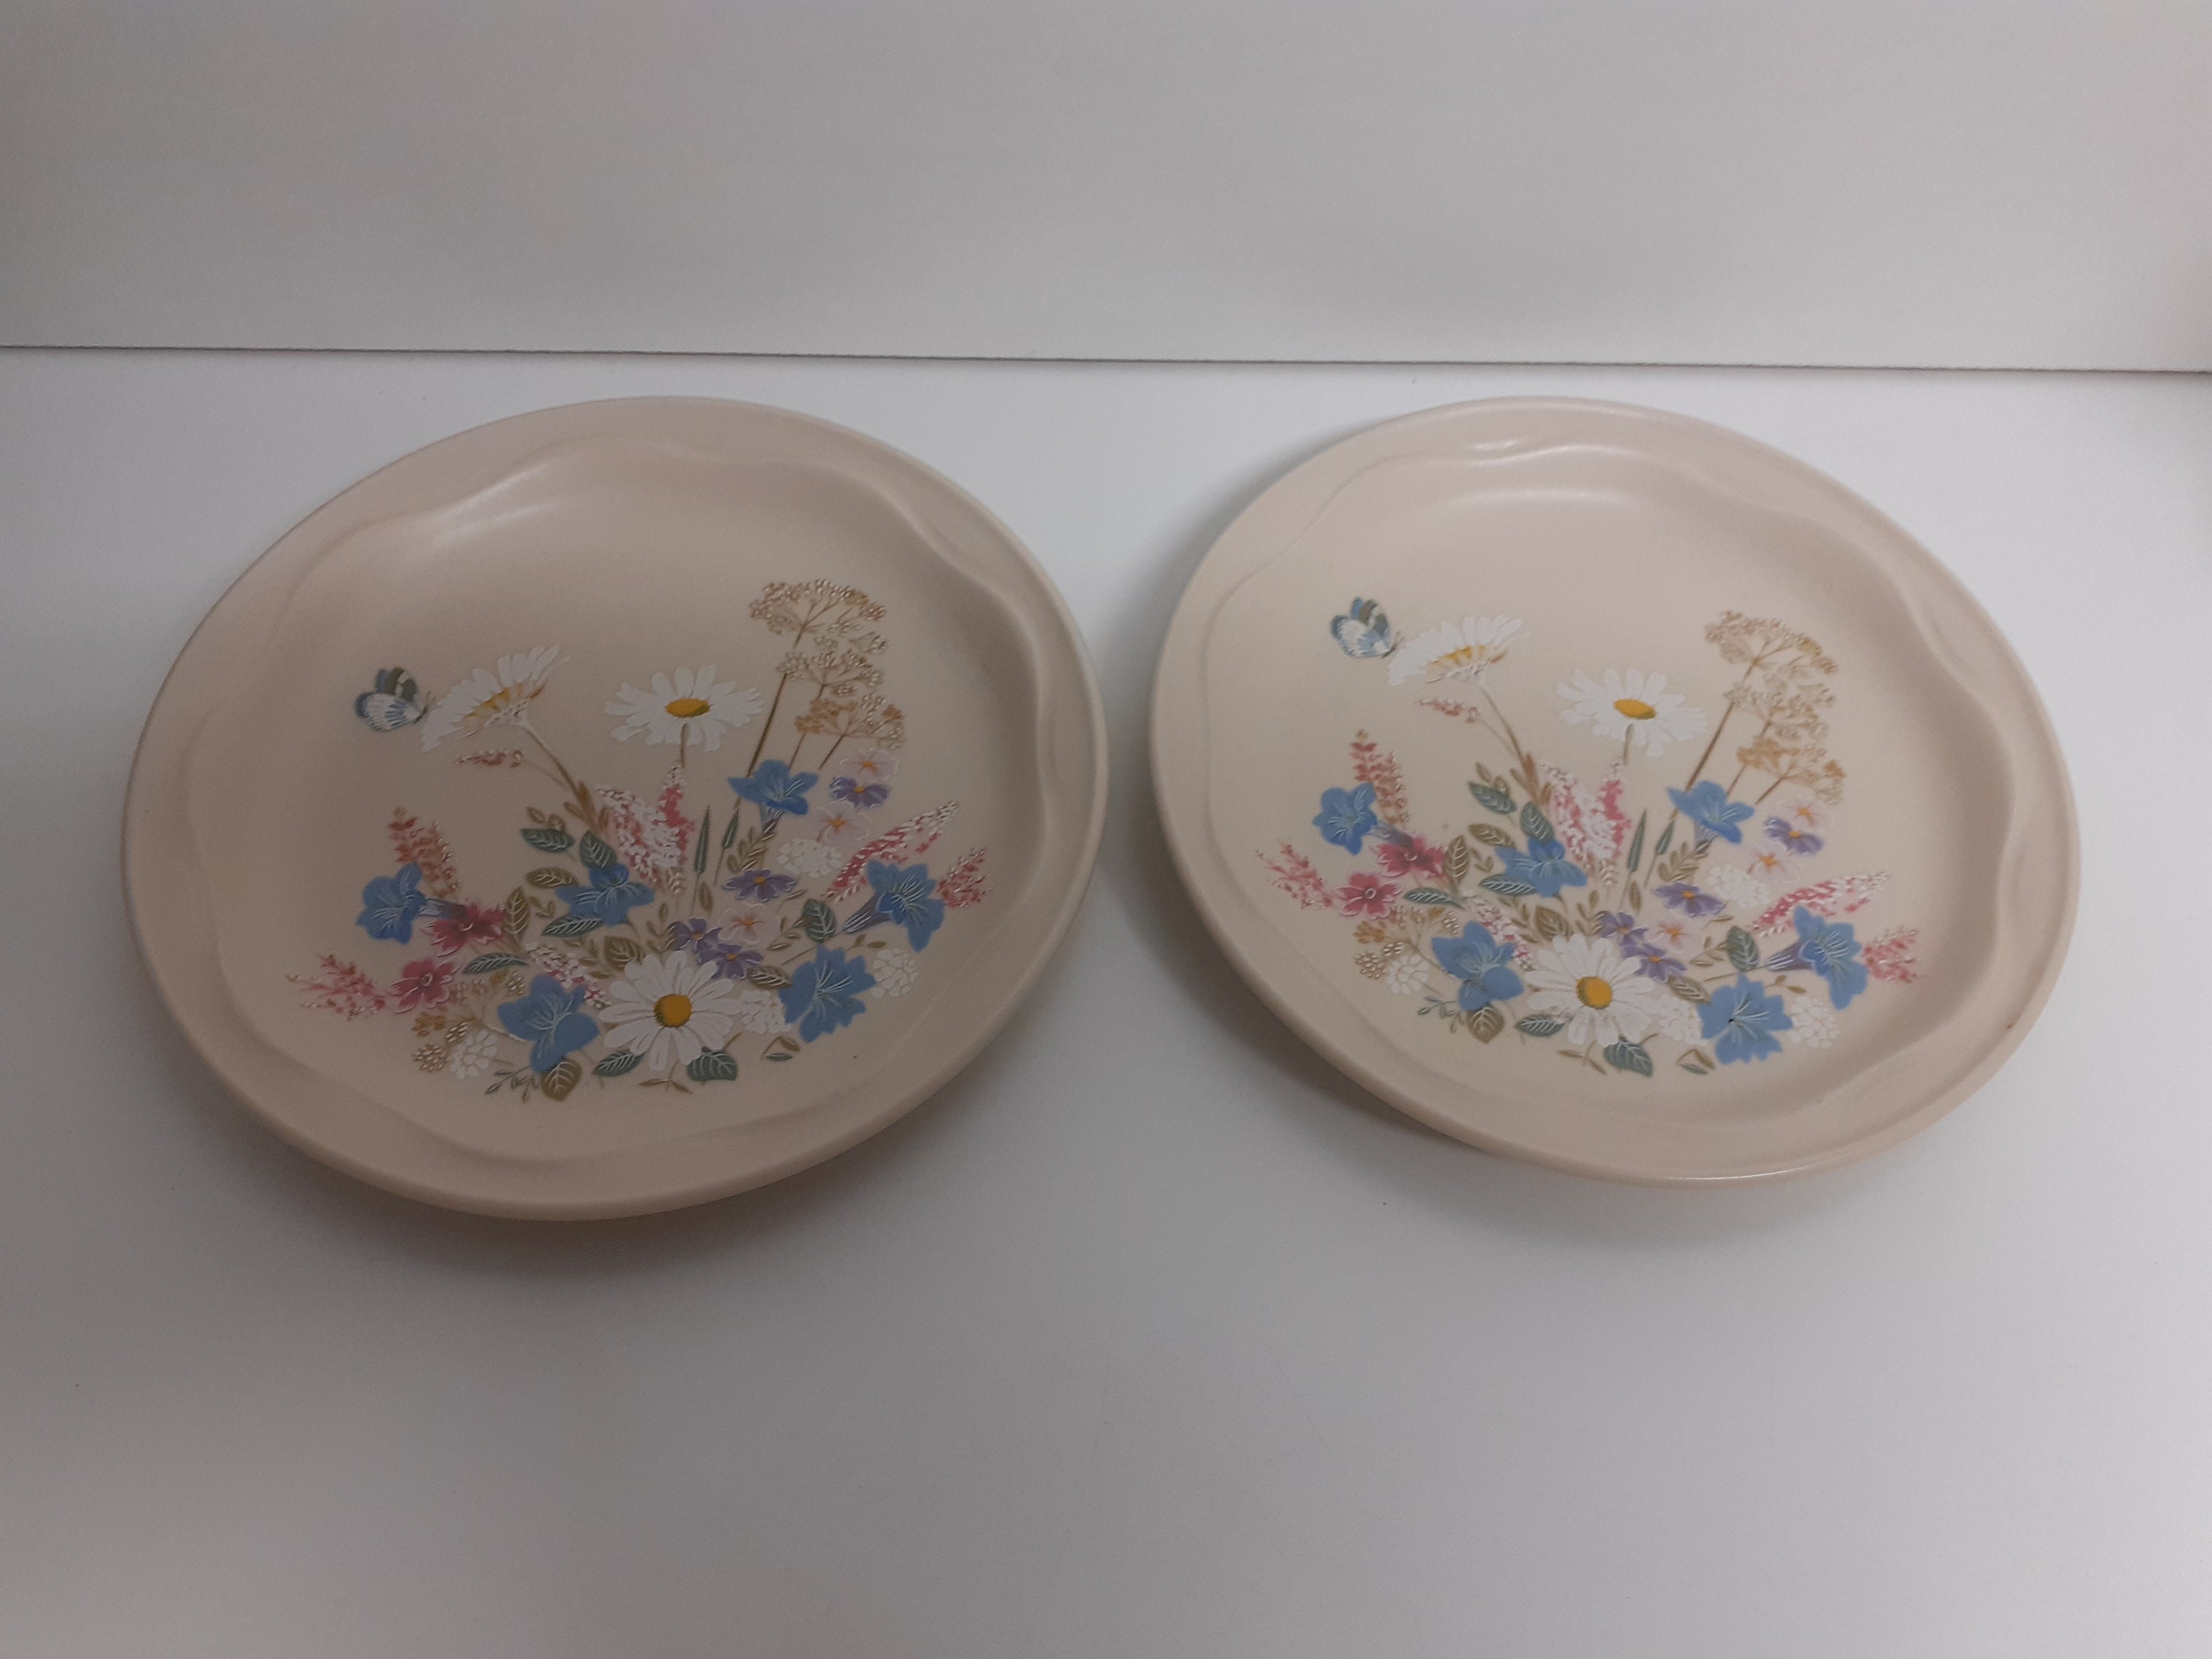 Vintage Palissy Worcester Stoneware Speckled Crofter Pattern Set of 2 Tea Plates 6 3/4 inches